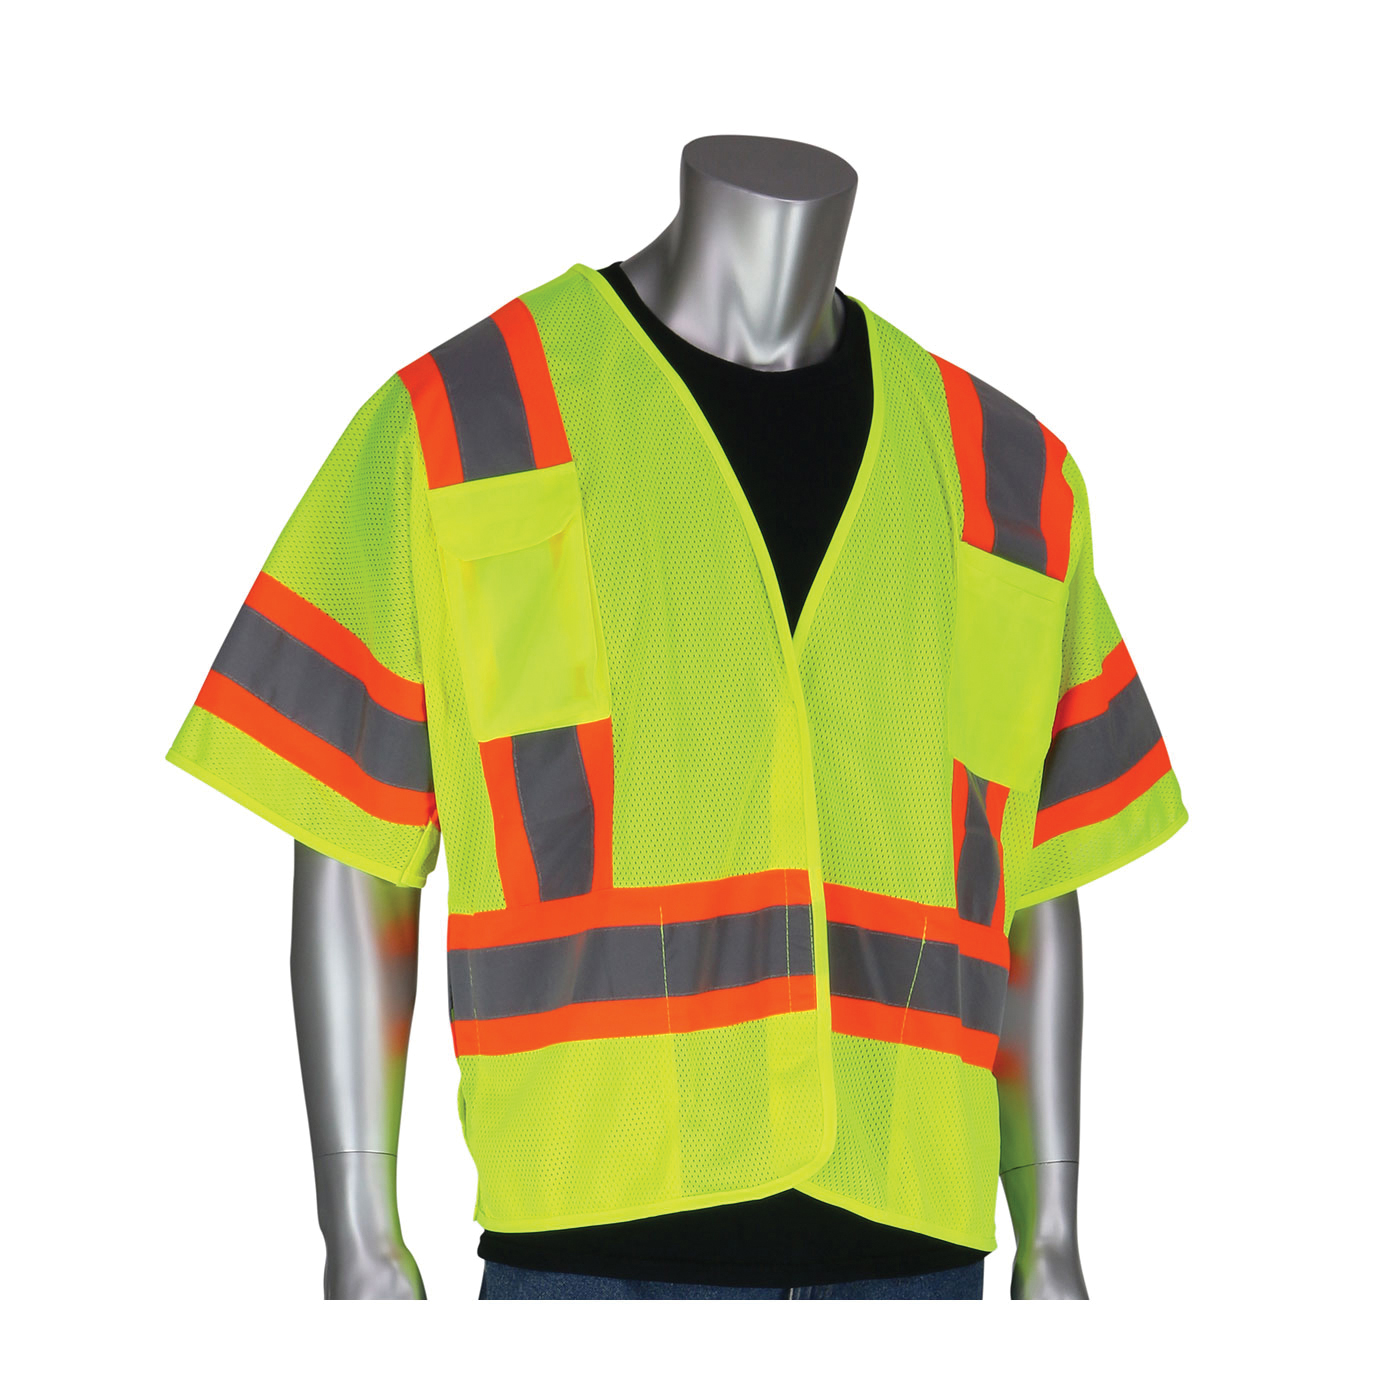 PIP® 303-5PMTT-LY/4X 2-Tone Safety Vest, 4XL, Hi-Viz Lime Yellow, Polyester Mesh, Hook and Loop Closure, 4 Pockets, ANSI Class: Class 3, Specifications Met: ANSI 107 Type R